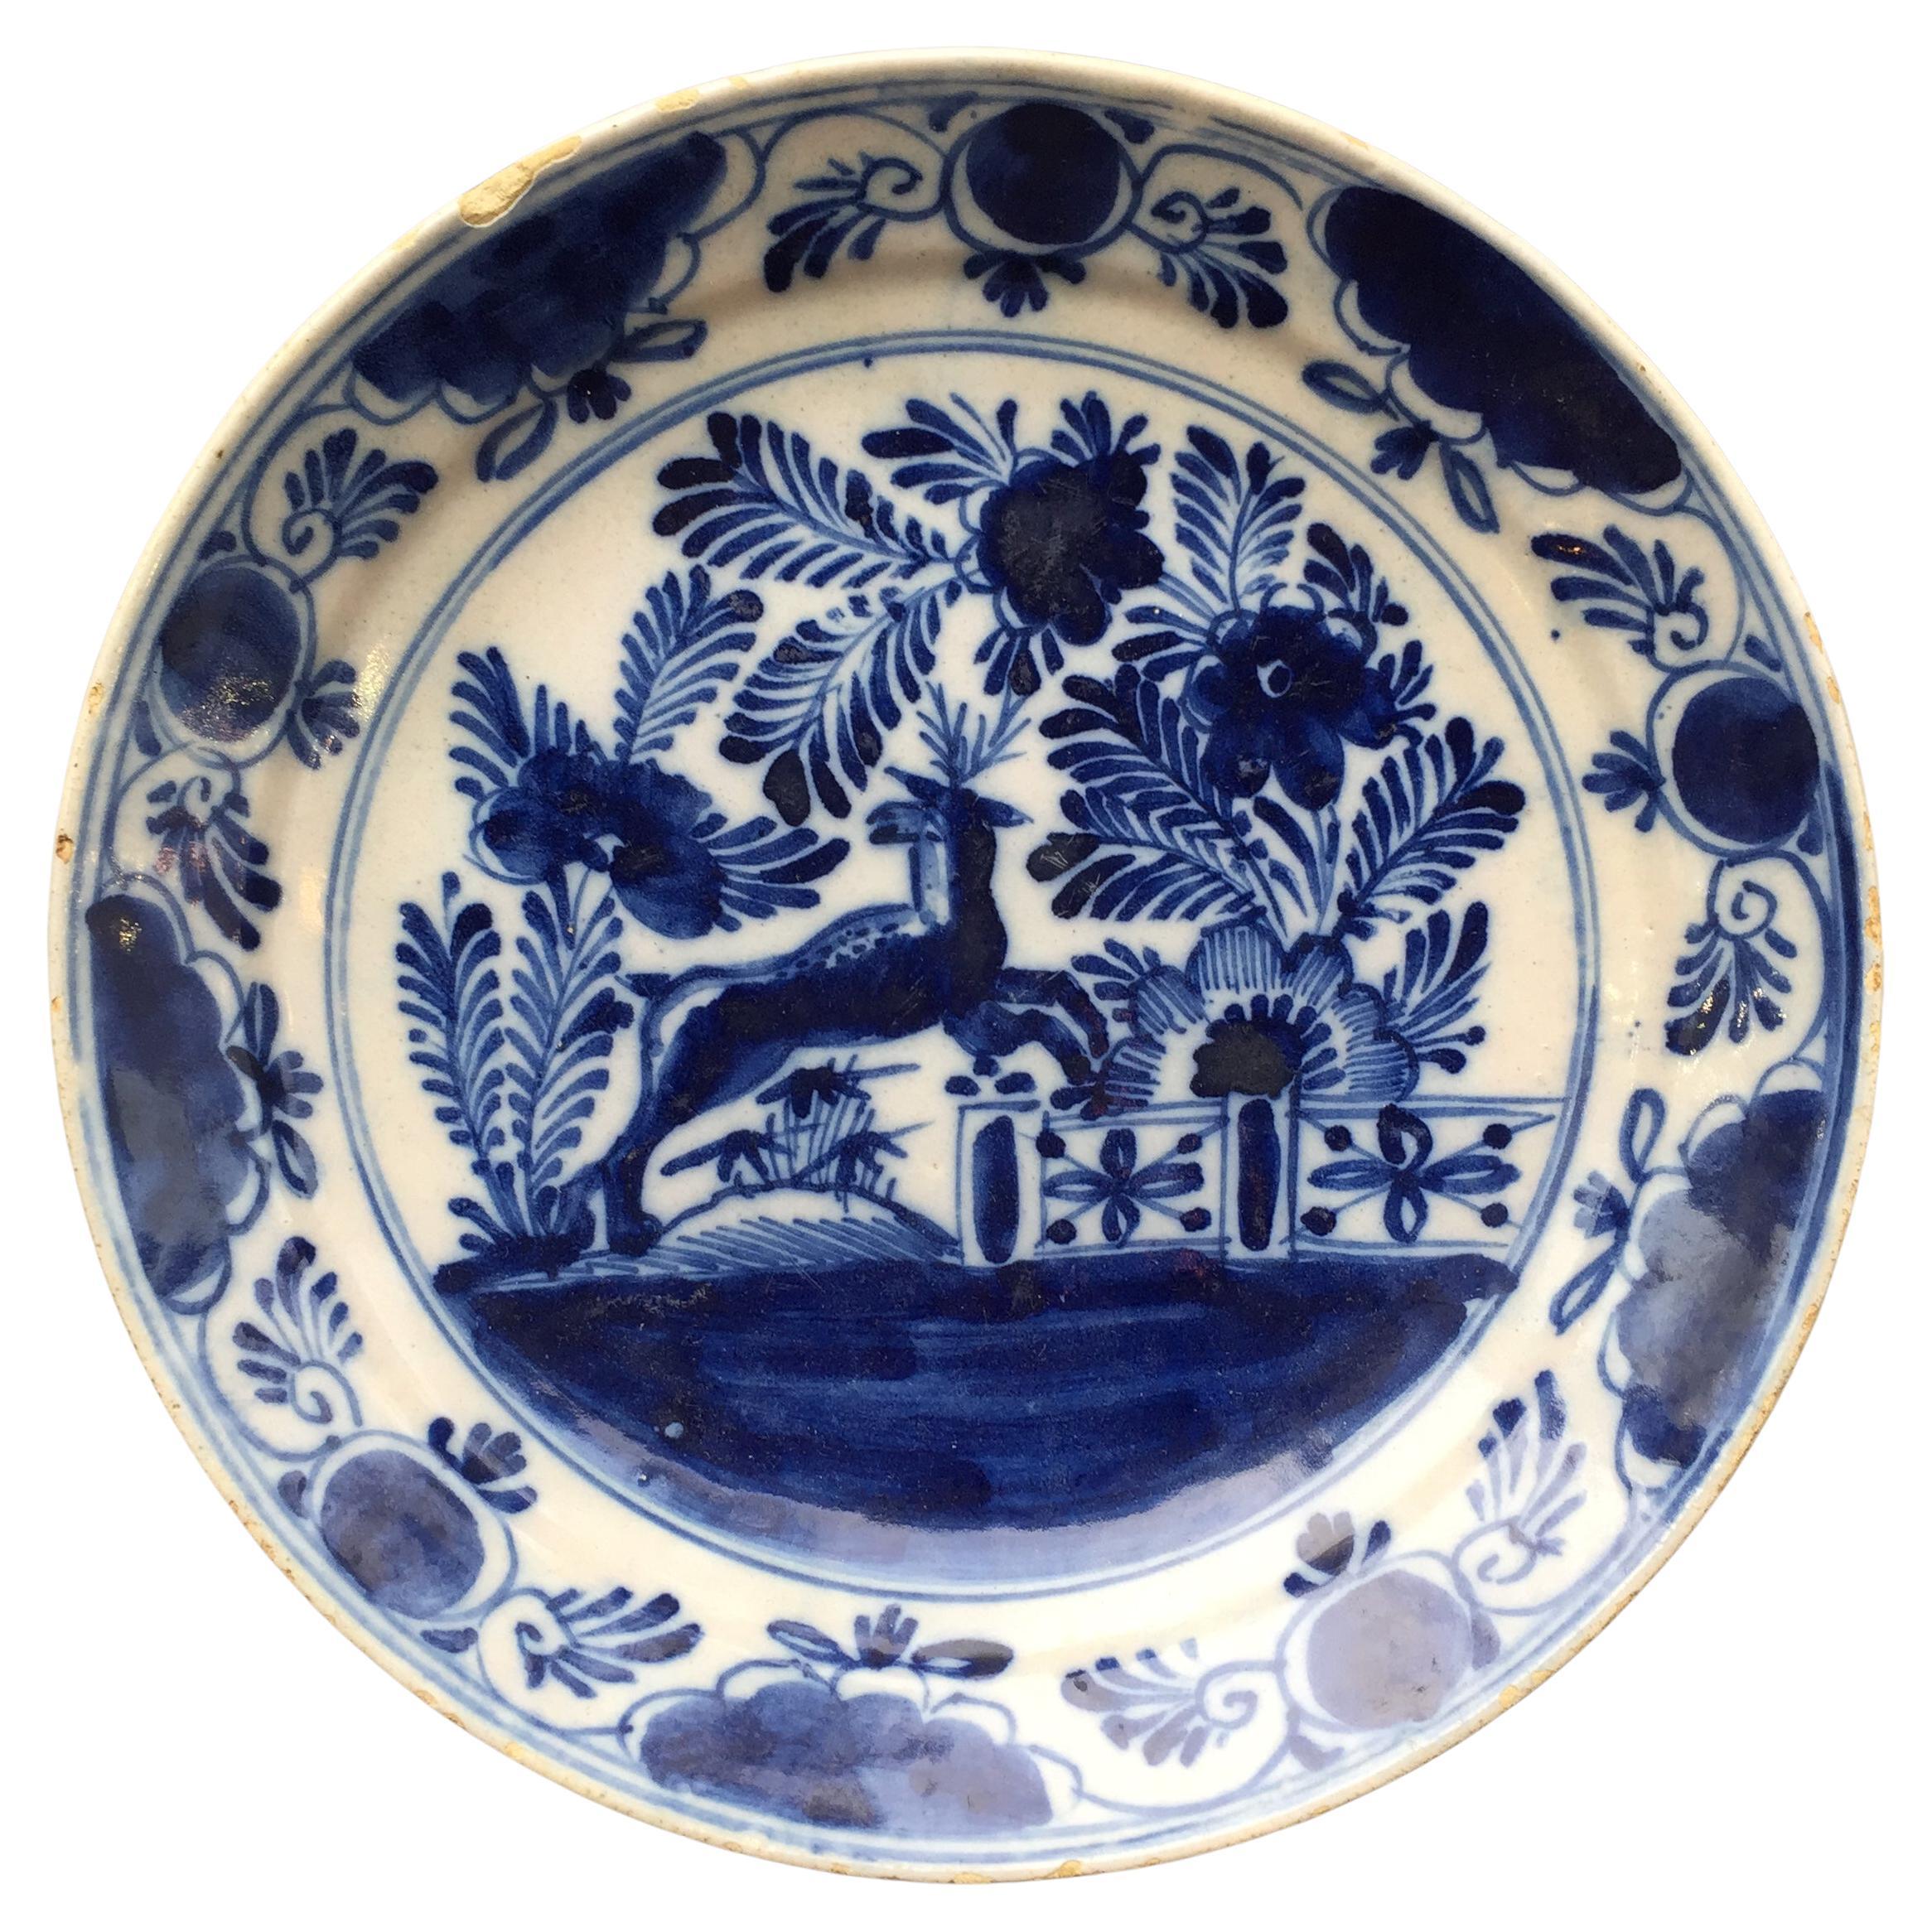 Dutch Delft Plate with a Deer, 18th Century